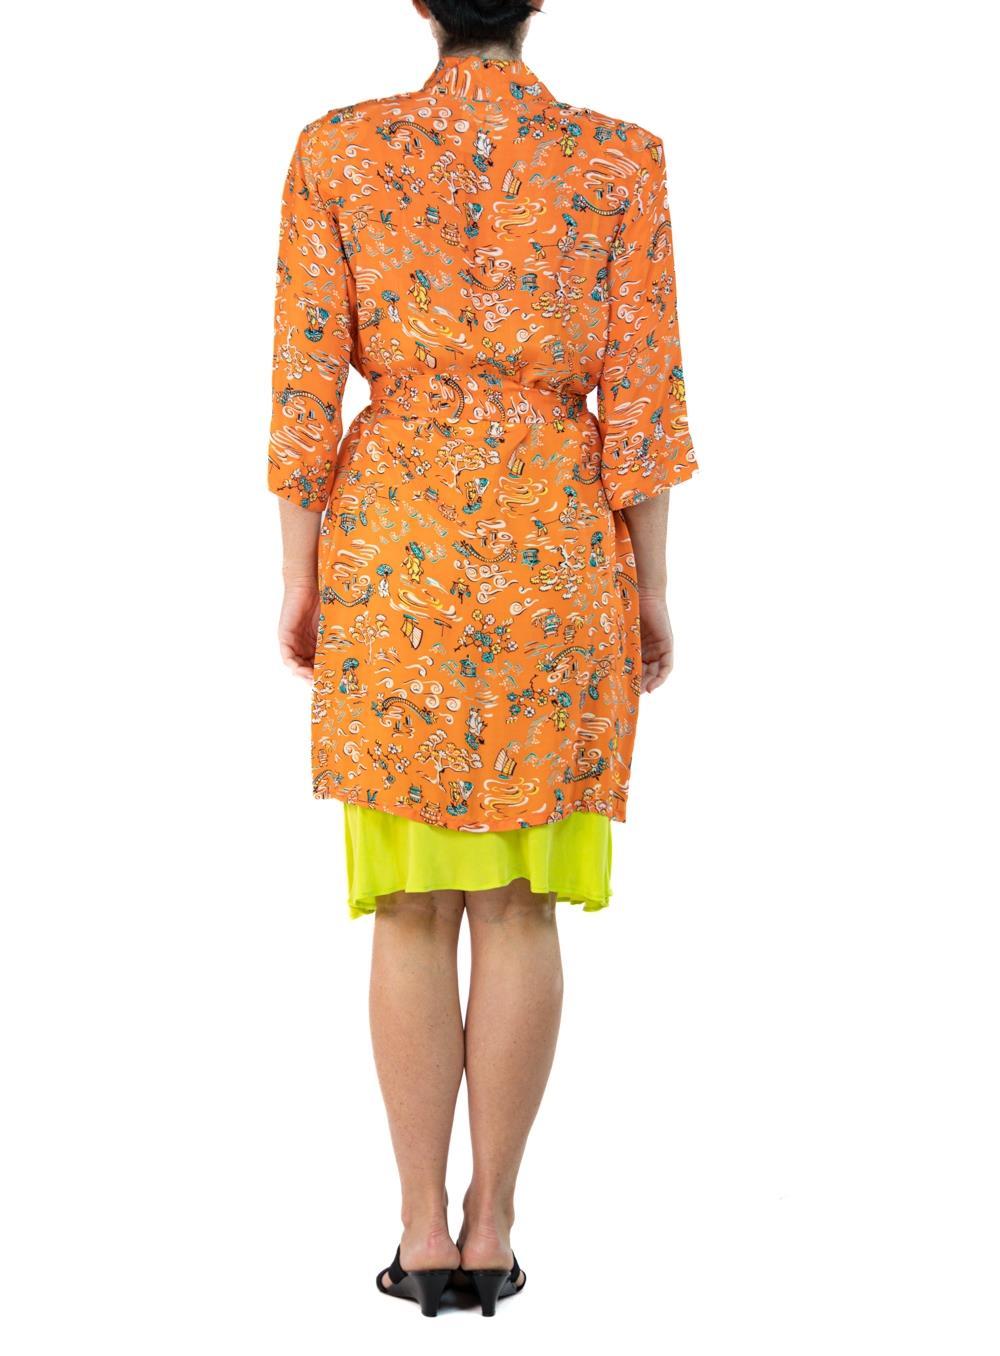 Morphew Collection Orange & Yellow Cherry Blossom Novelty Print Cold Rayon Bias For Sale 2